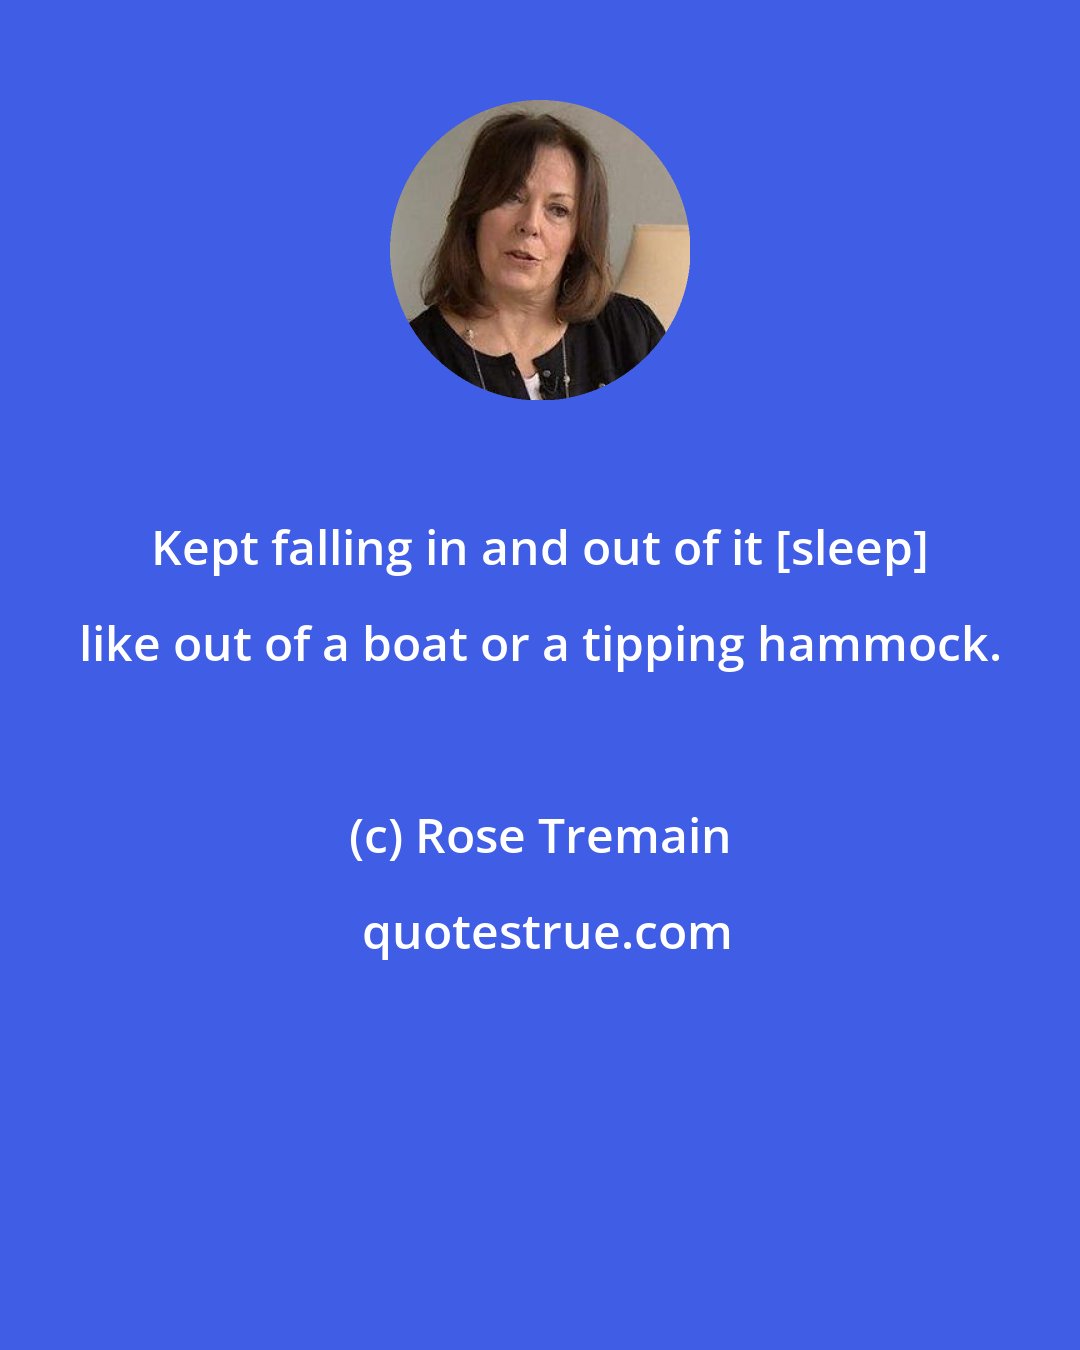 Rose Tremain: Kept falling in and out of it [sleep] like out of a boat or a tipping hammock.